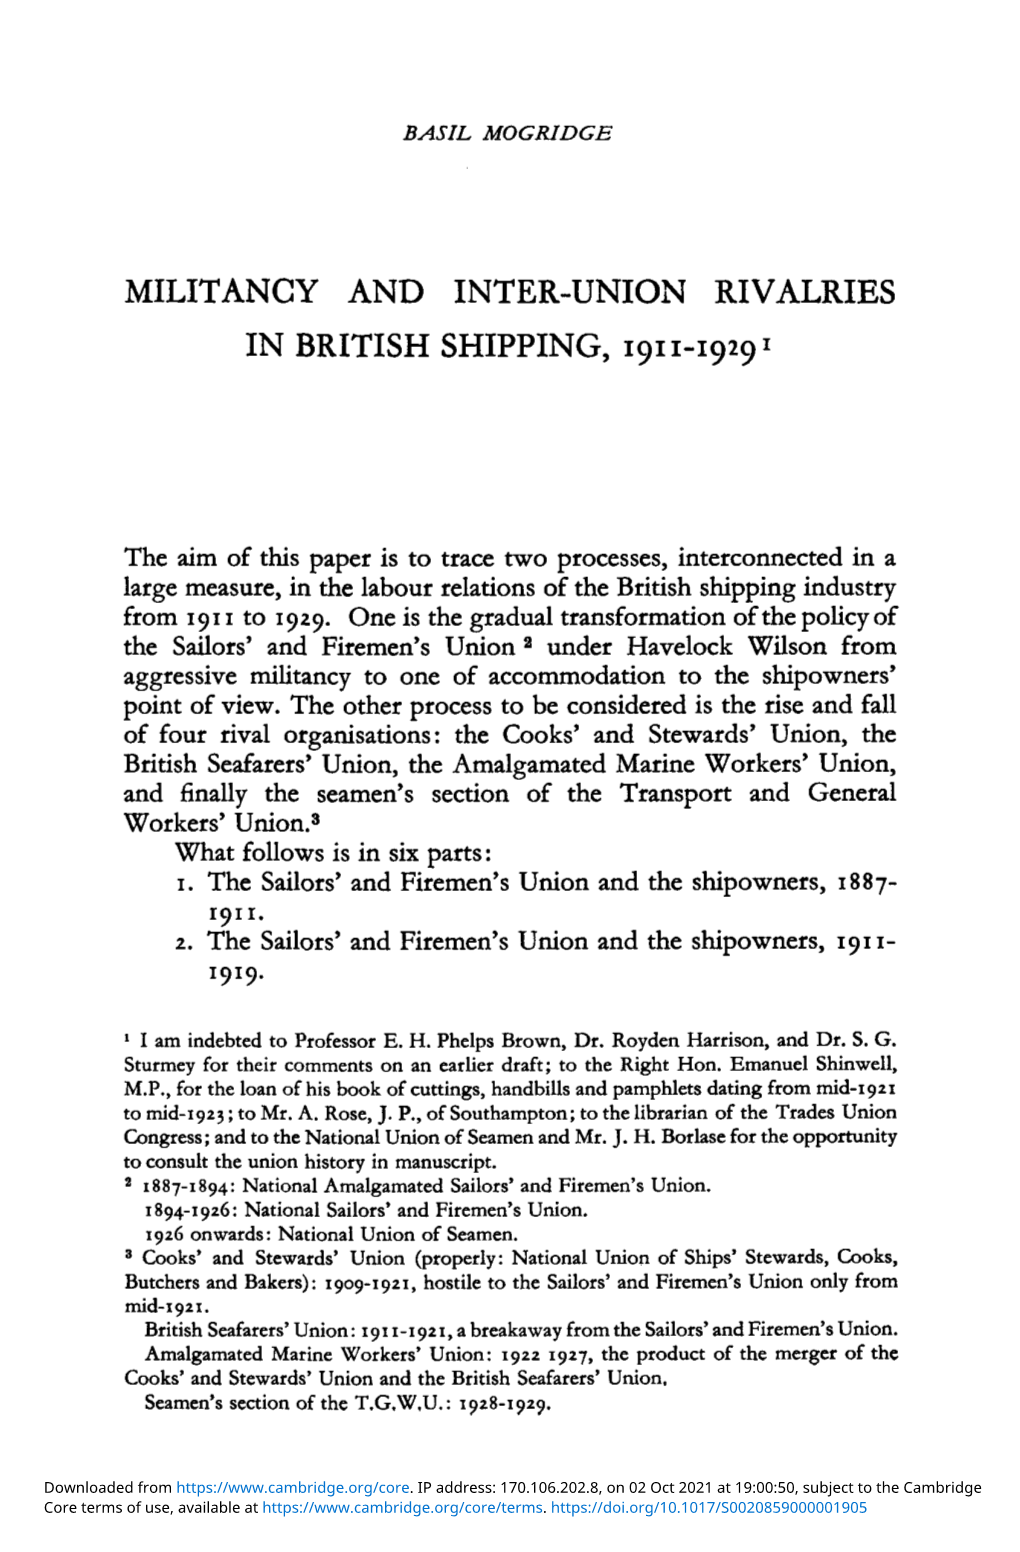 Militancy and Inter-Union Rivalries in British Shipping, 1911–1929